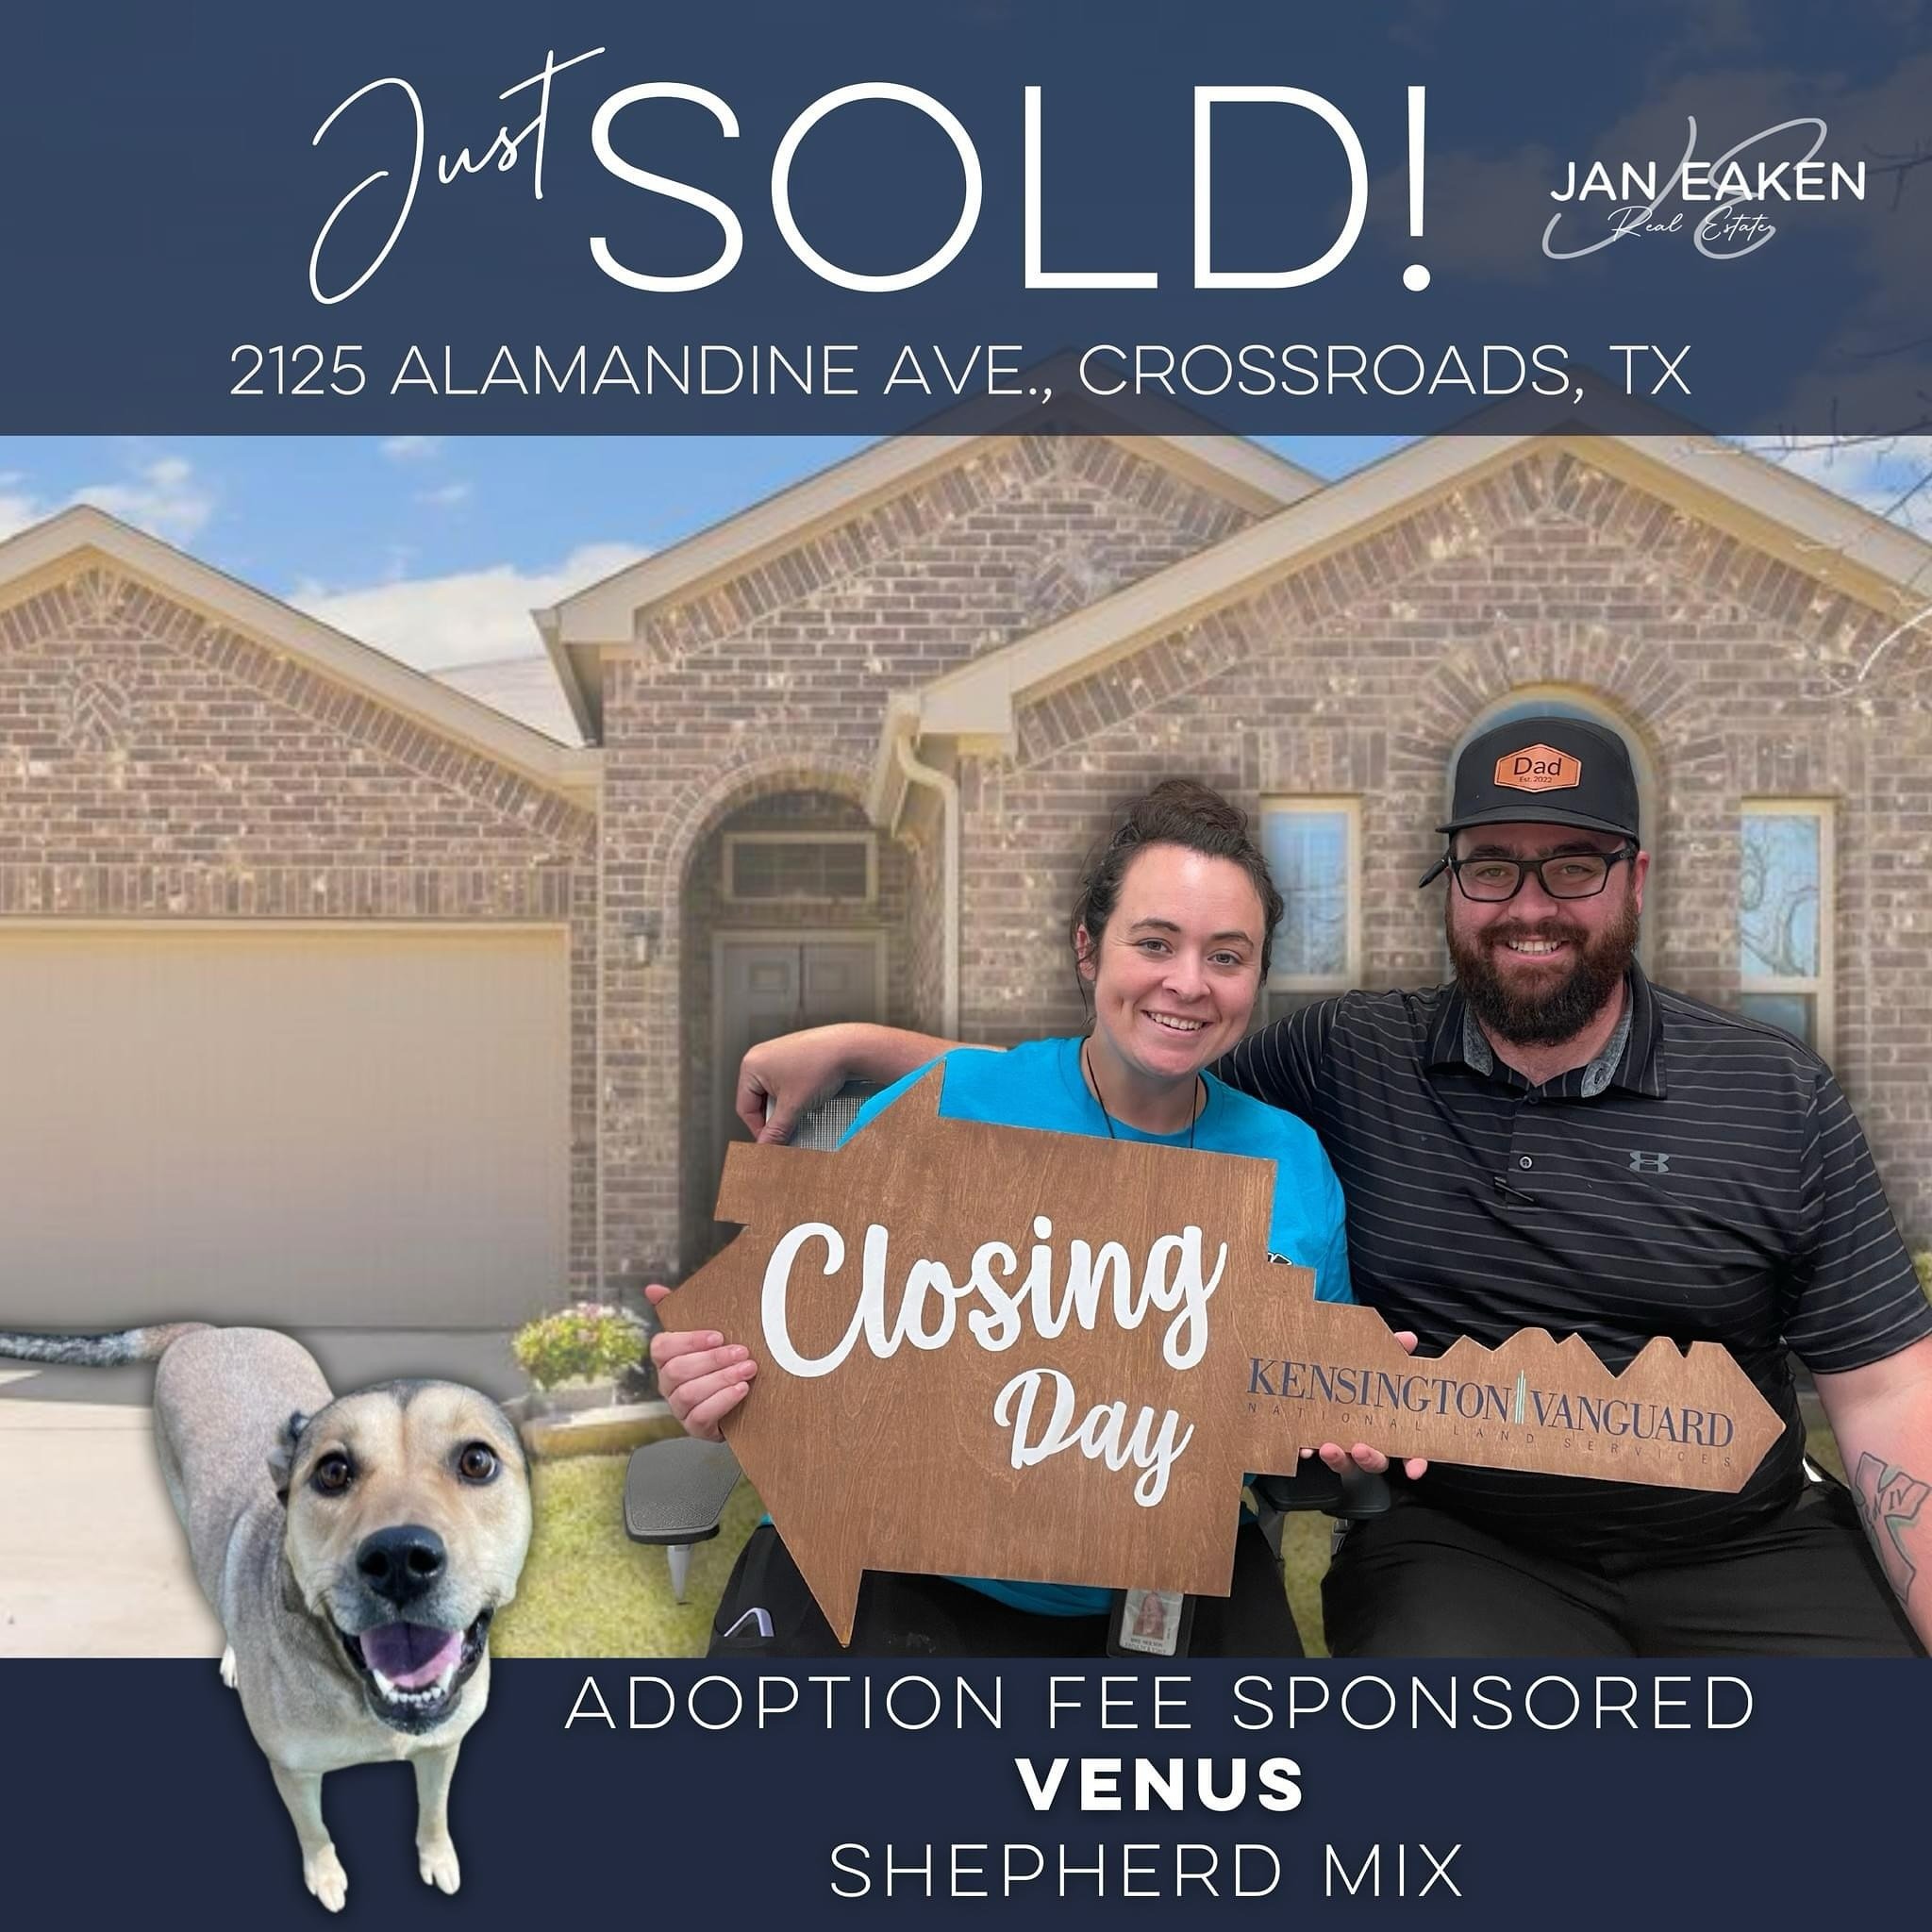 JUST CLOSED! Big congratulations to Josh and Micah on the sale of their home! They have two adorable kids are moving to a larger home to provide more room for their family. 🥰 

With the sale of this home, I am sponsoring the adoption fee for Venus a